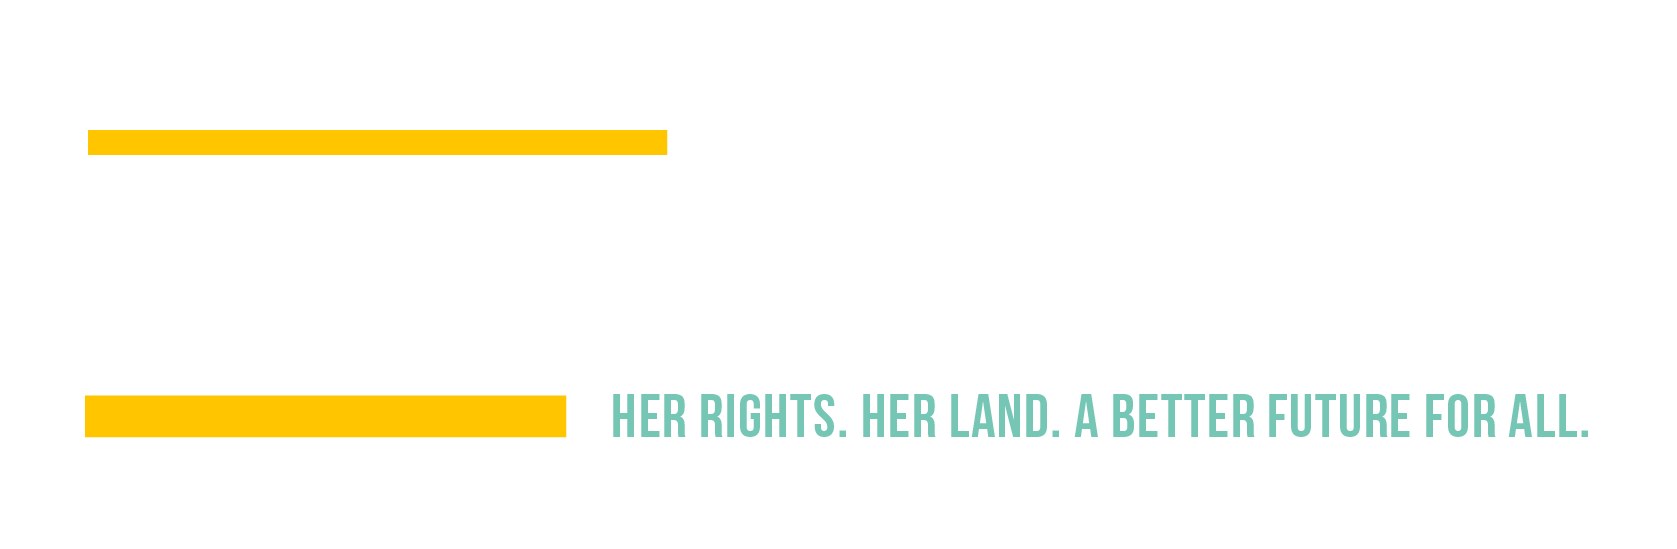 Stand for Her Land Campaign